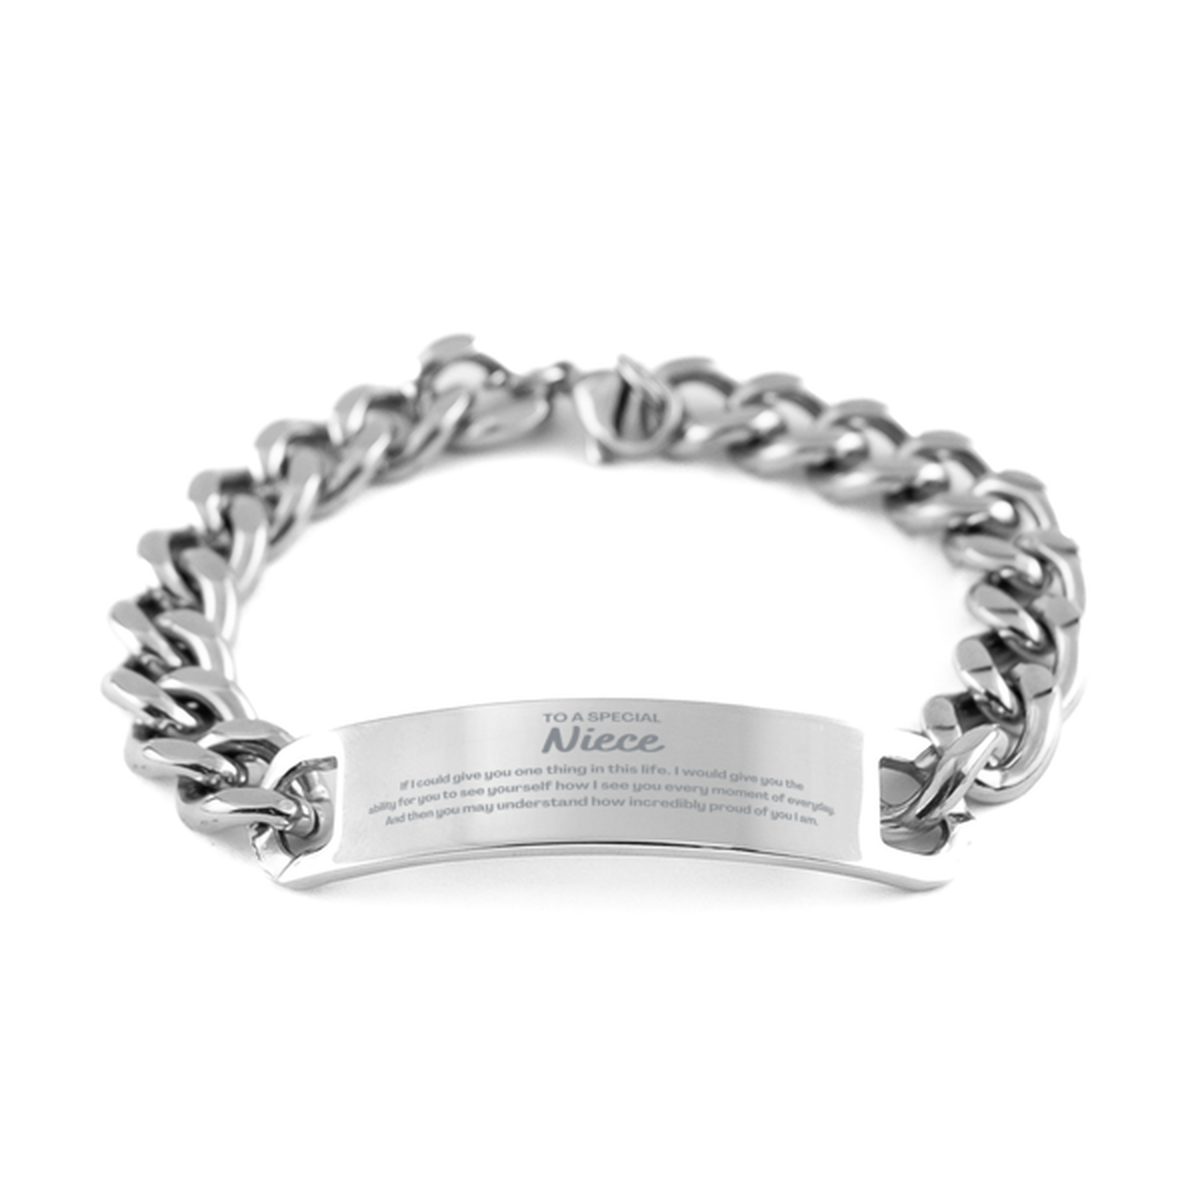 To My Niece Cuban Chain Stainless Steel Bracelet, Gifts For Niece Engraved, Inspirational Gifts for Christmas Birthday, Epic Gifts for Niece To A Special Niece how incredibly proud of you I am